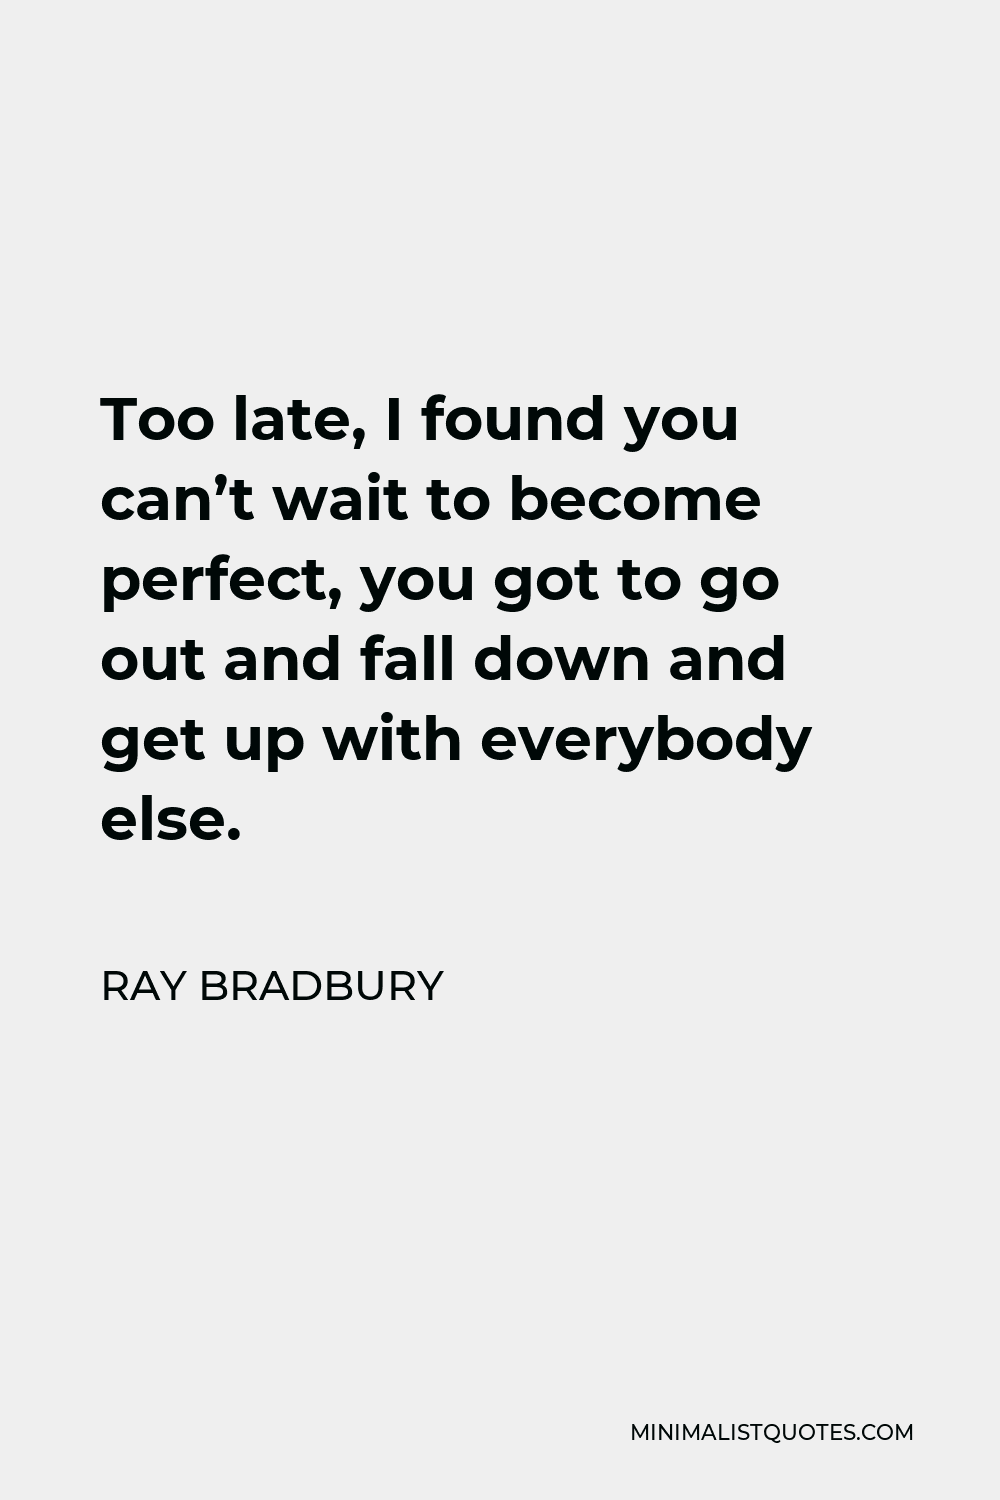 Ray Bradbury Quote - Too late, I found you can’t wait to become perfect, you got to go out and fall down and get up with everybody else.